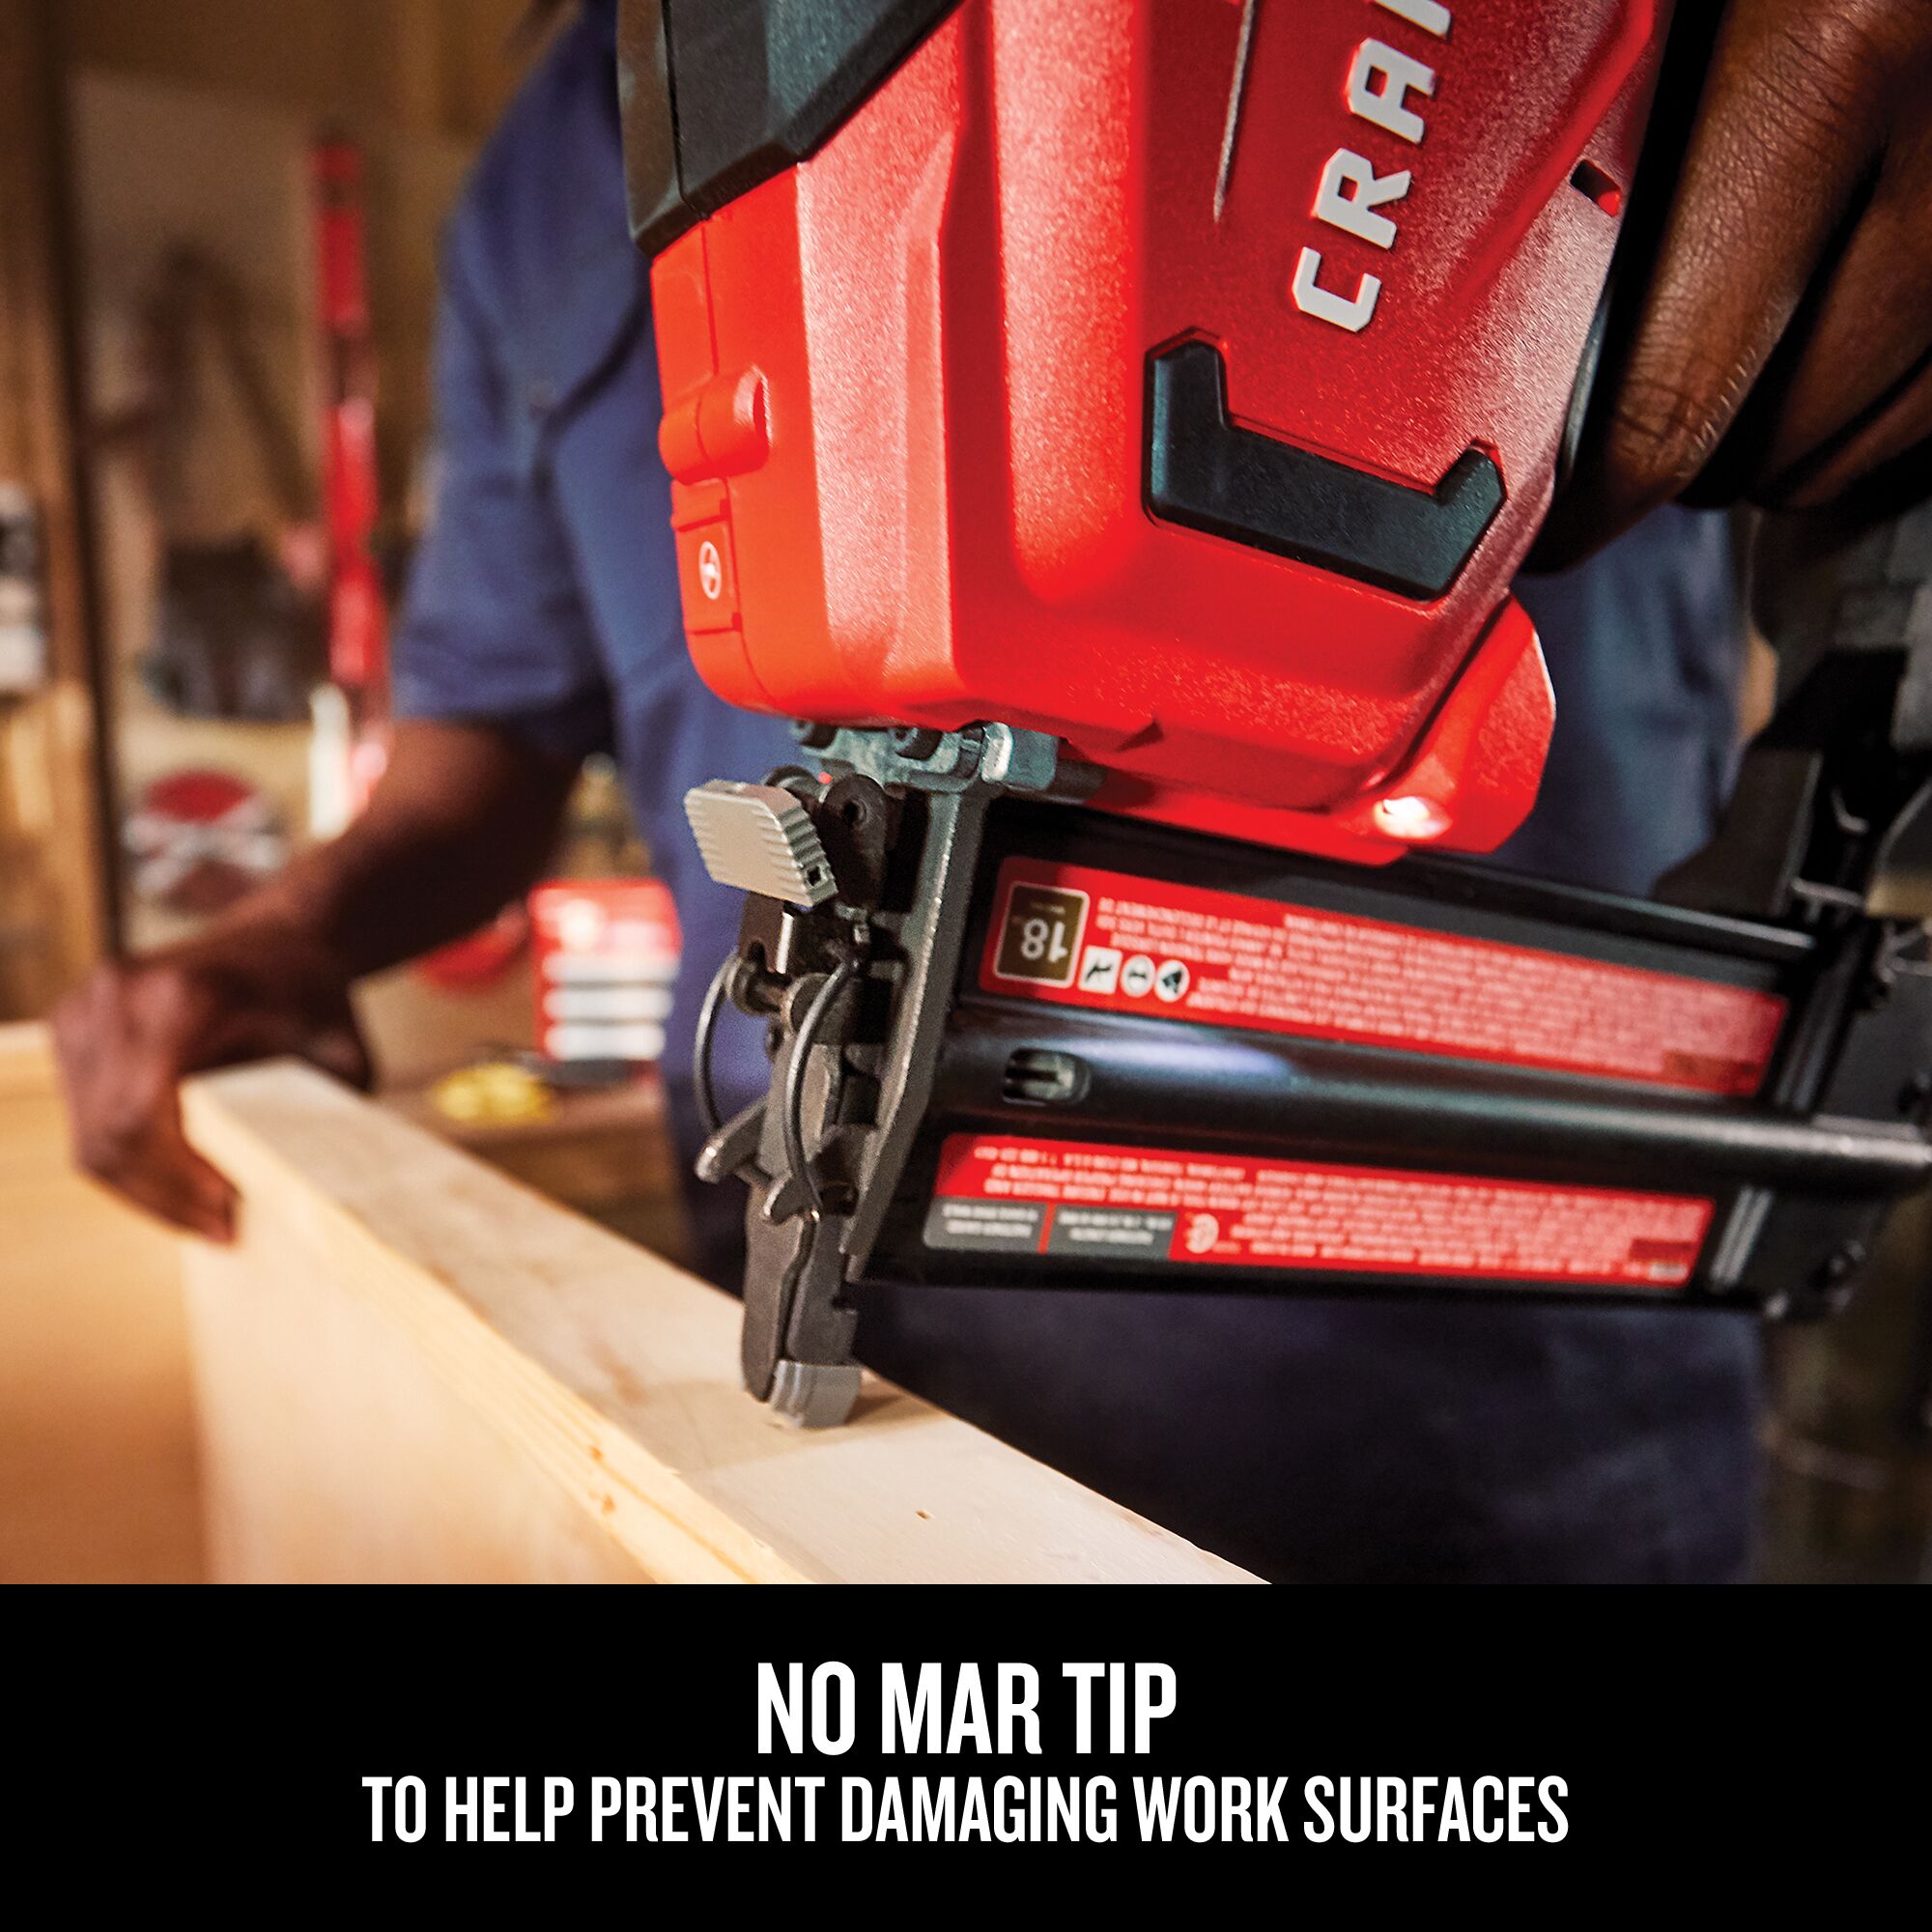 Graphic of CRAFTSMAN Nailer: Brad highlighting product features